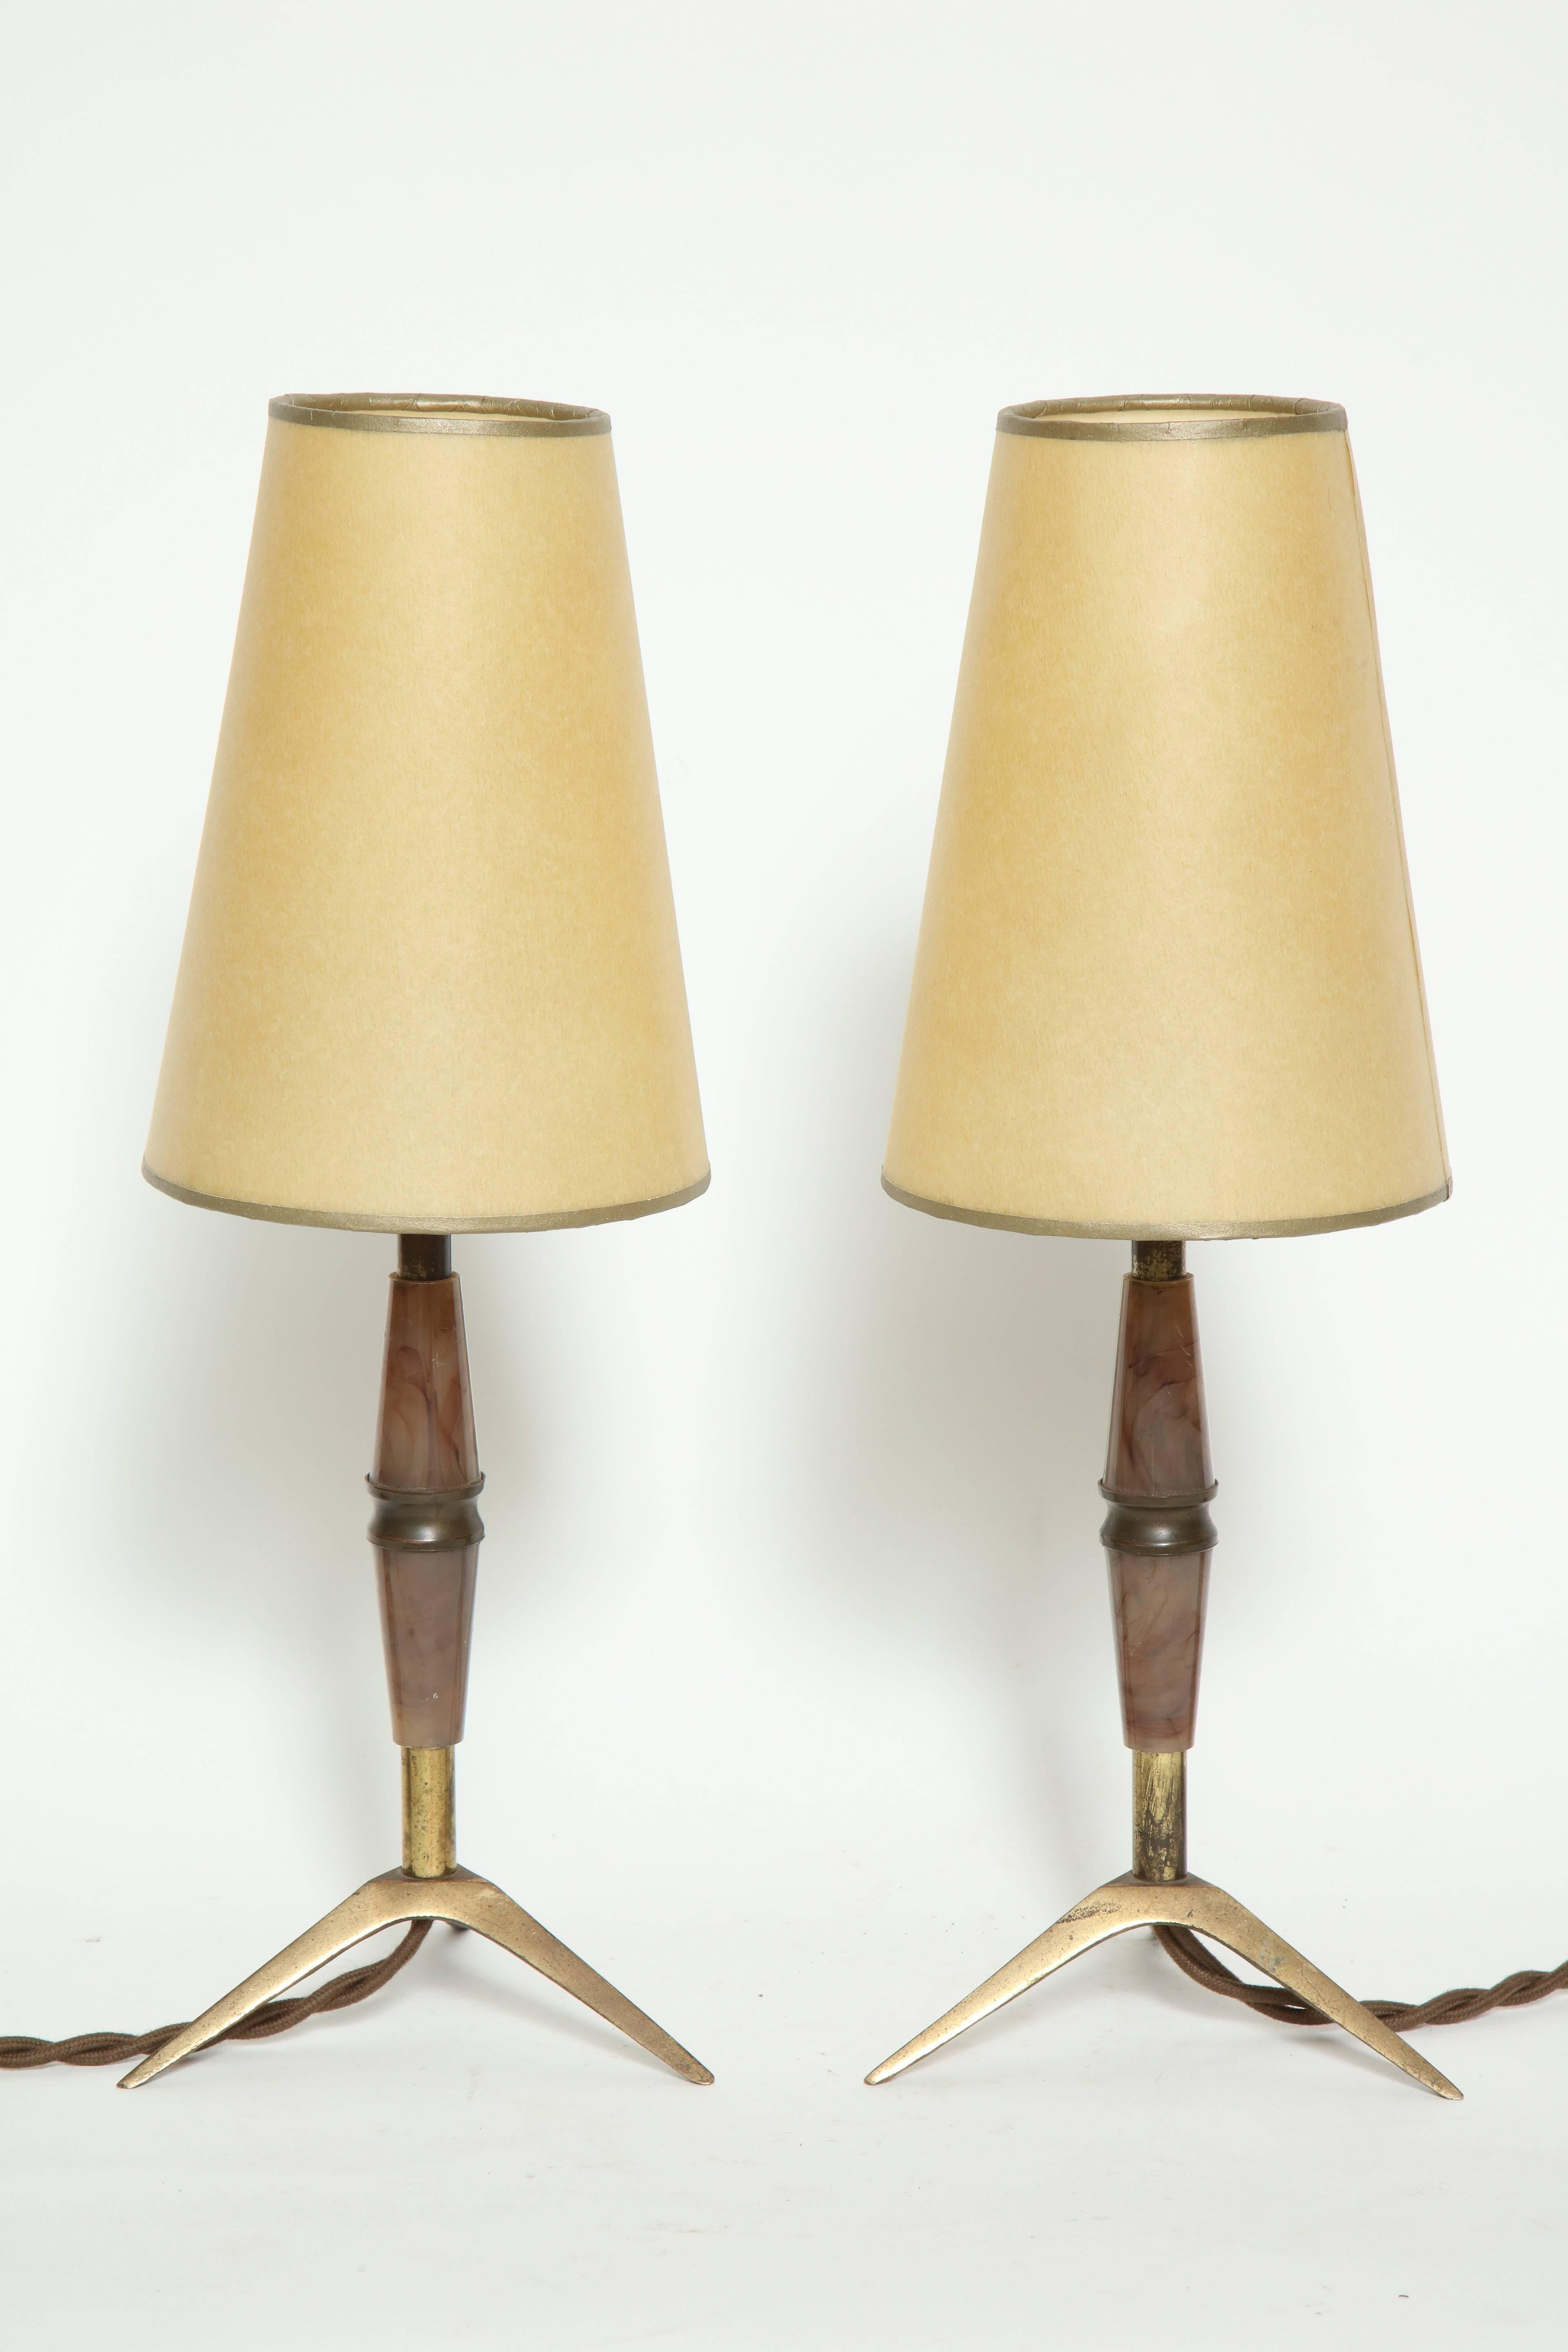 Cast Brass and Bakelite Table Lamps